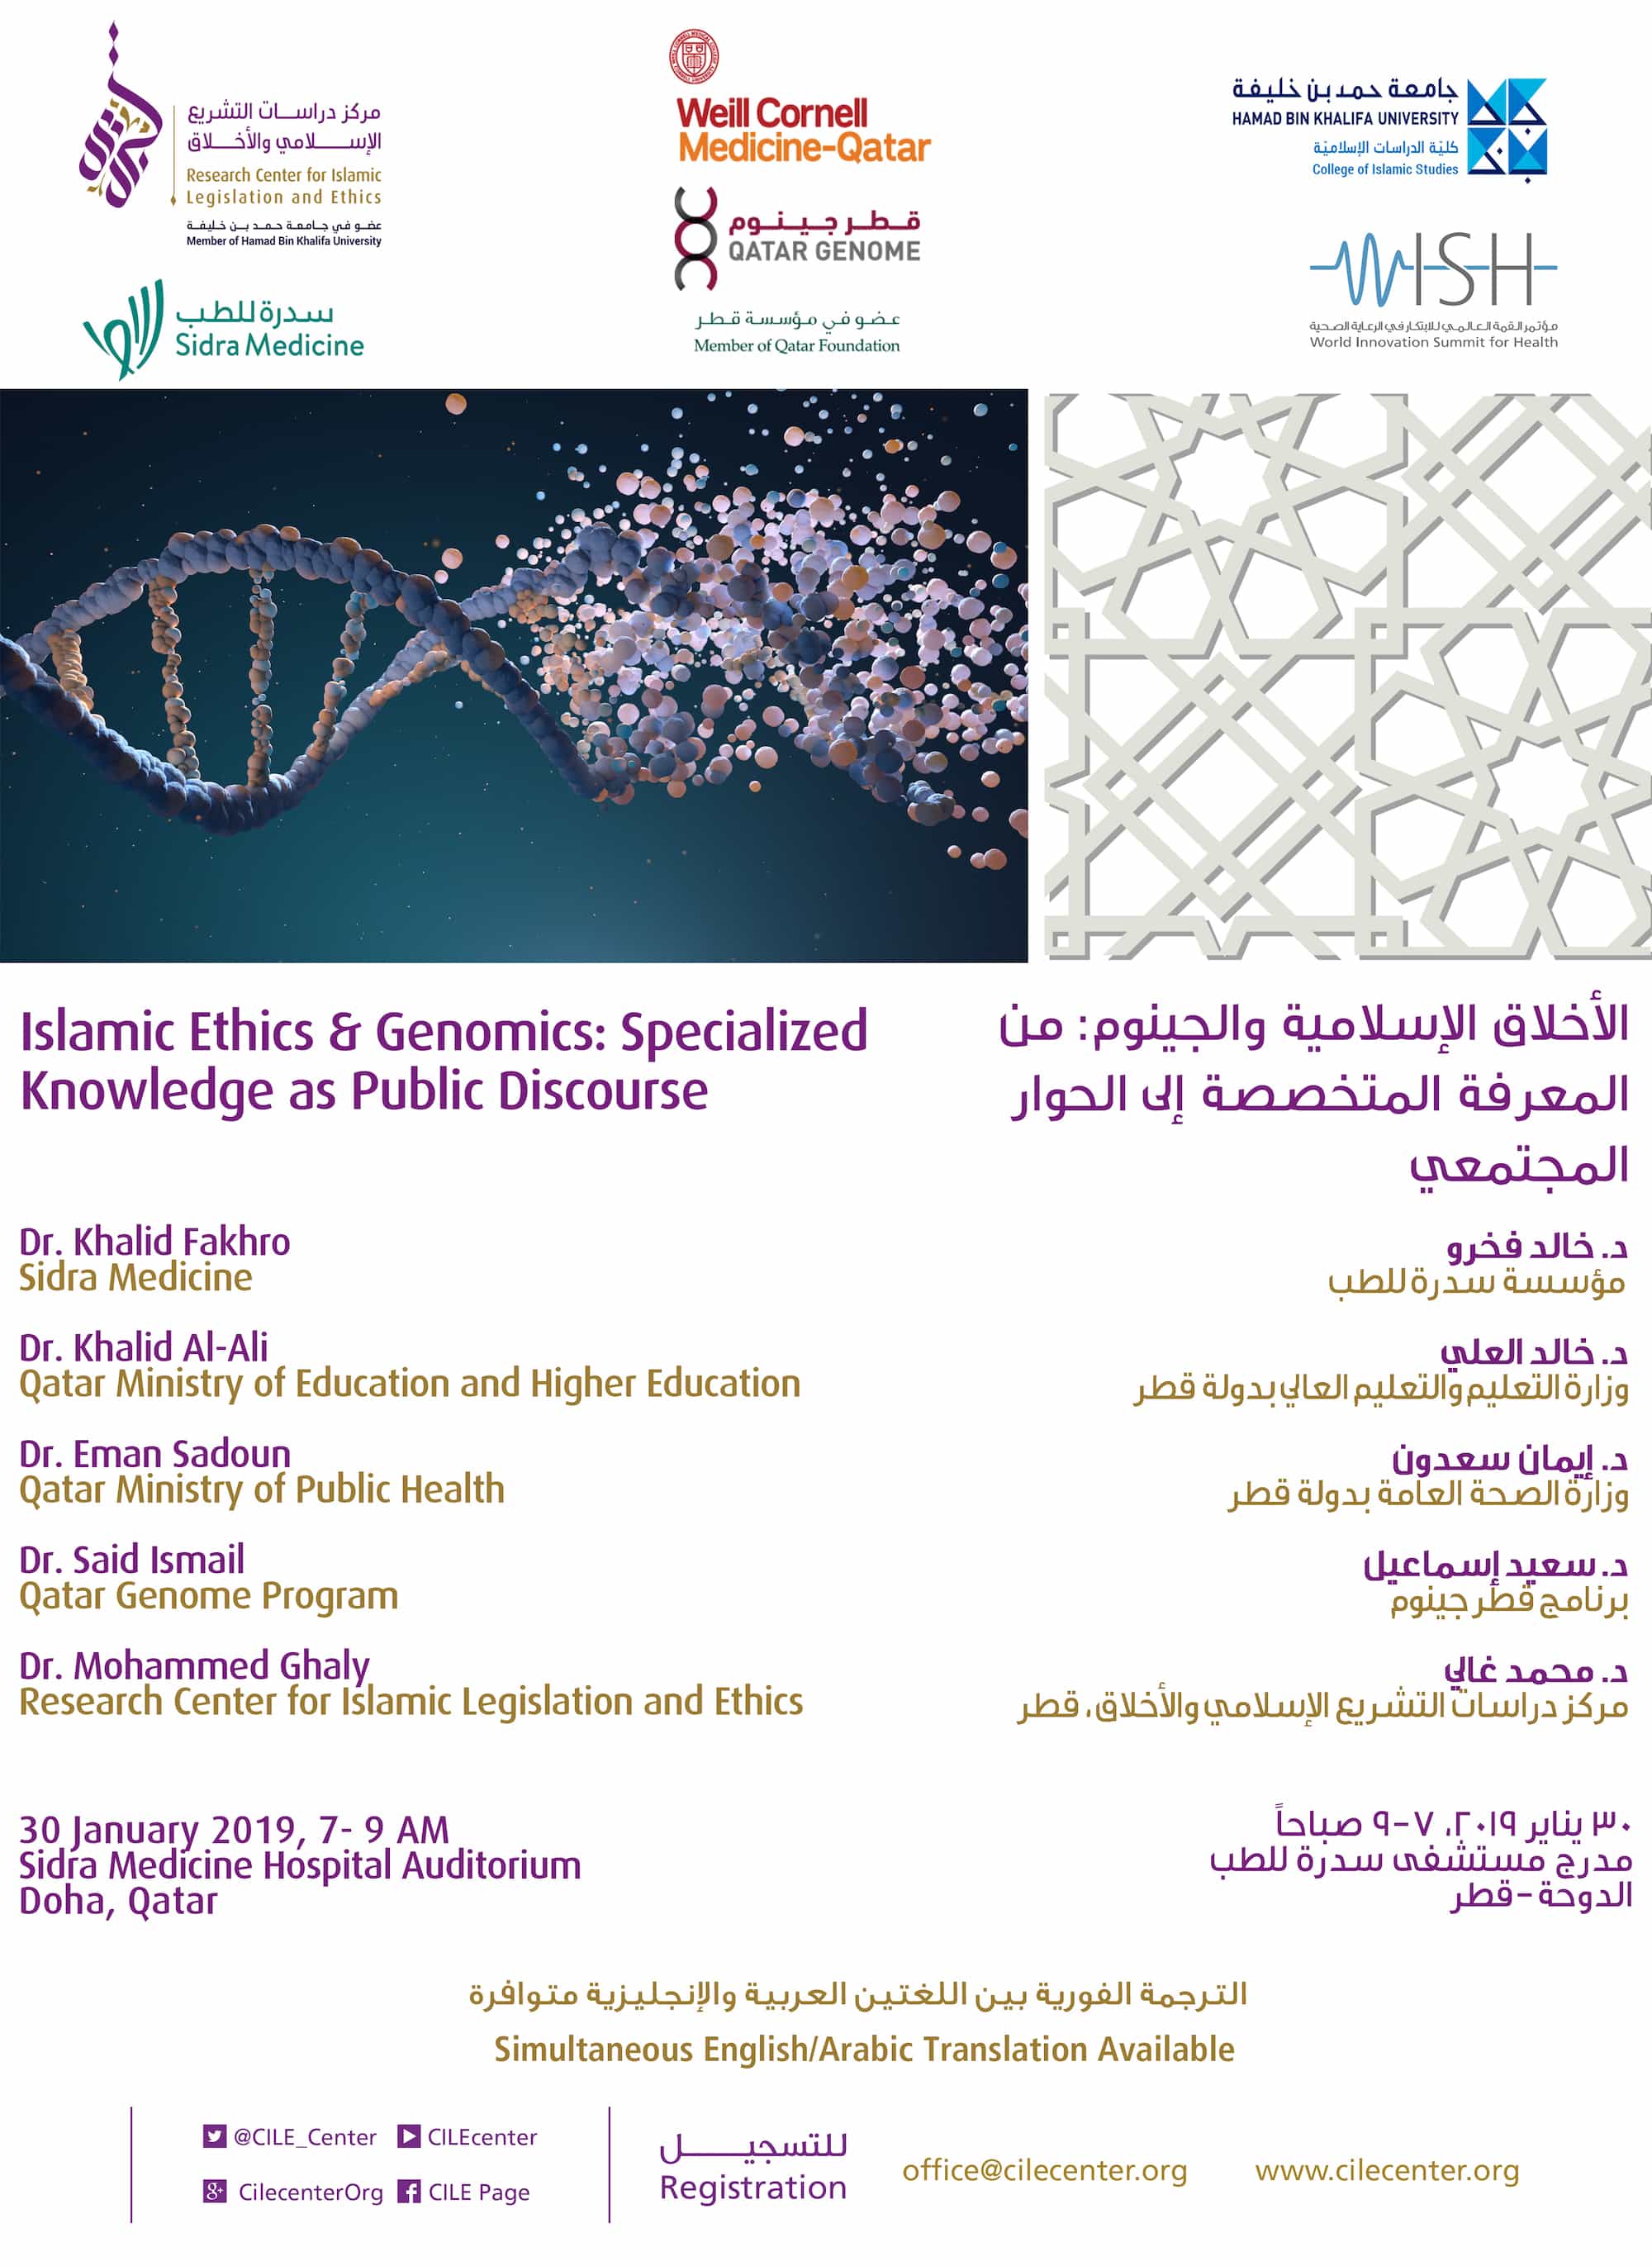 01/2019 Islamic Ethics & Genomics: Specialized Knowledge as Public Discourse